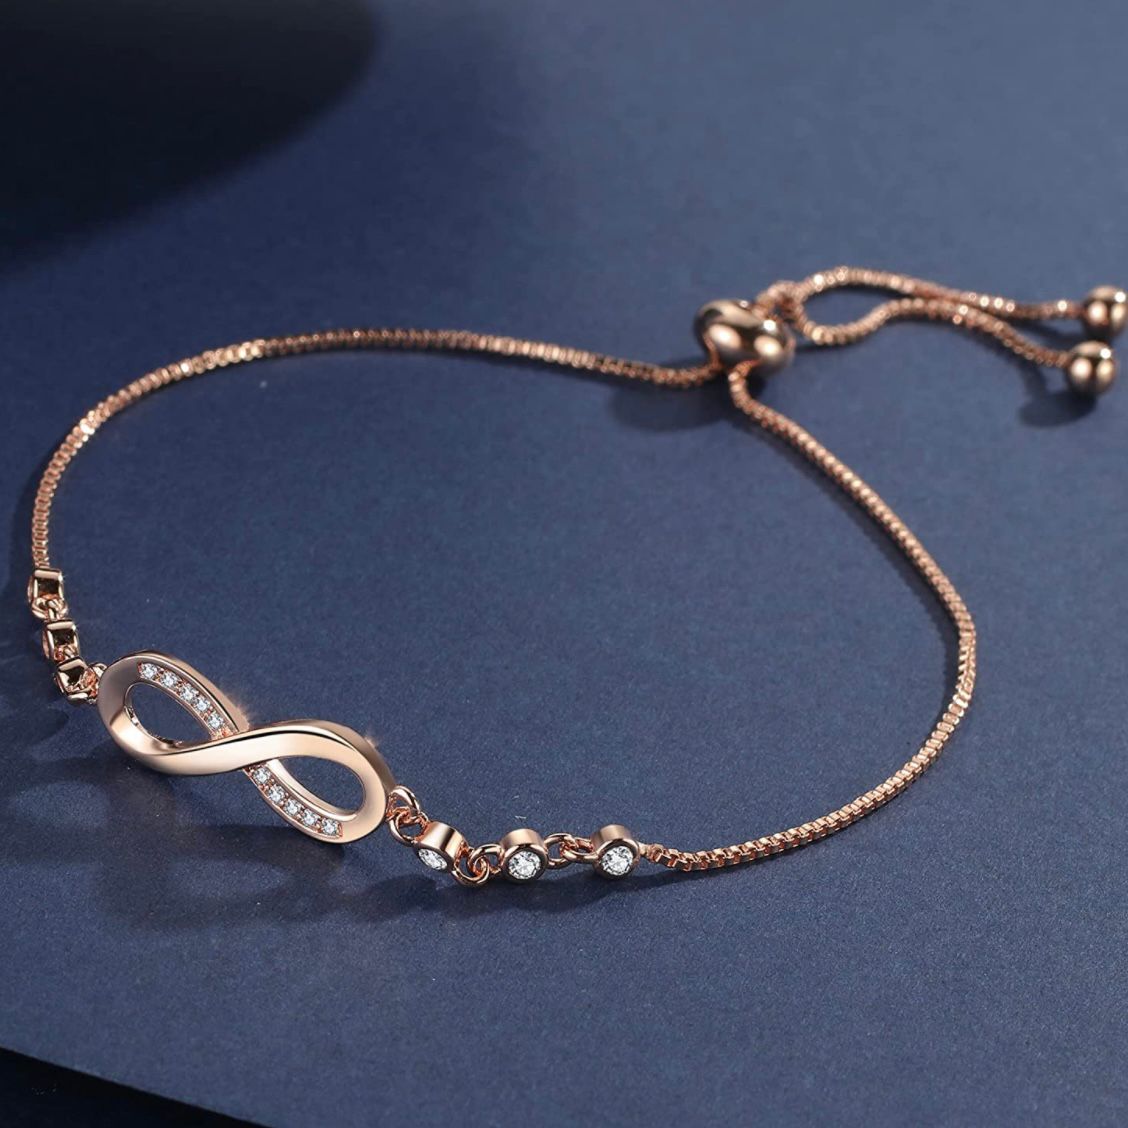 COSIE LILY - 925 STERLING SILVER INFINITY CRYSTAL BRACELET - ROSE GOLD